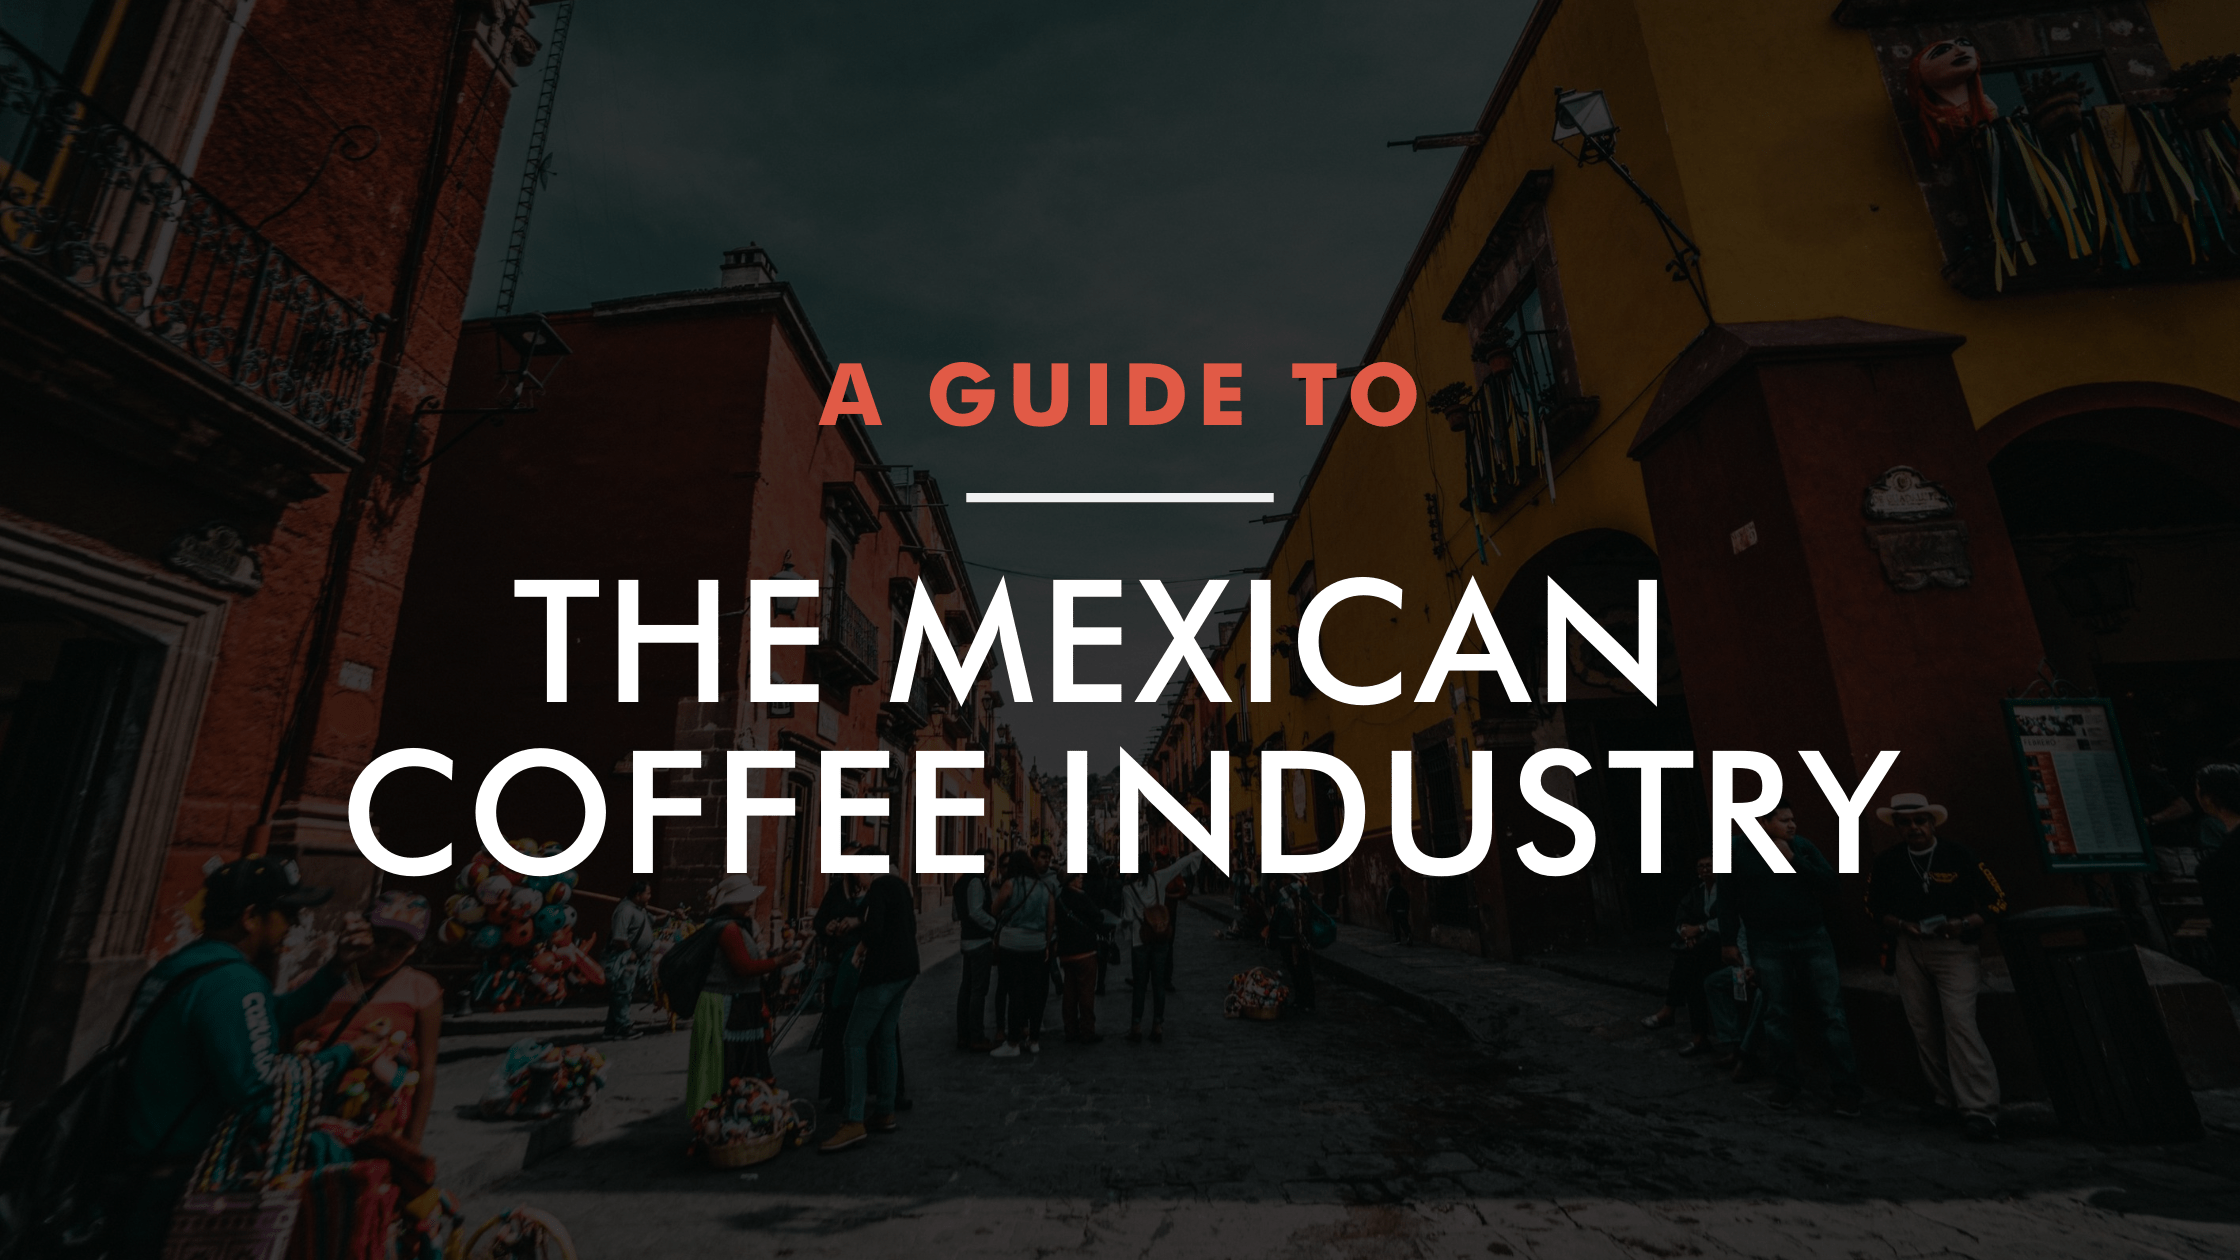 The Mexican Coffee Industry